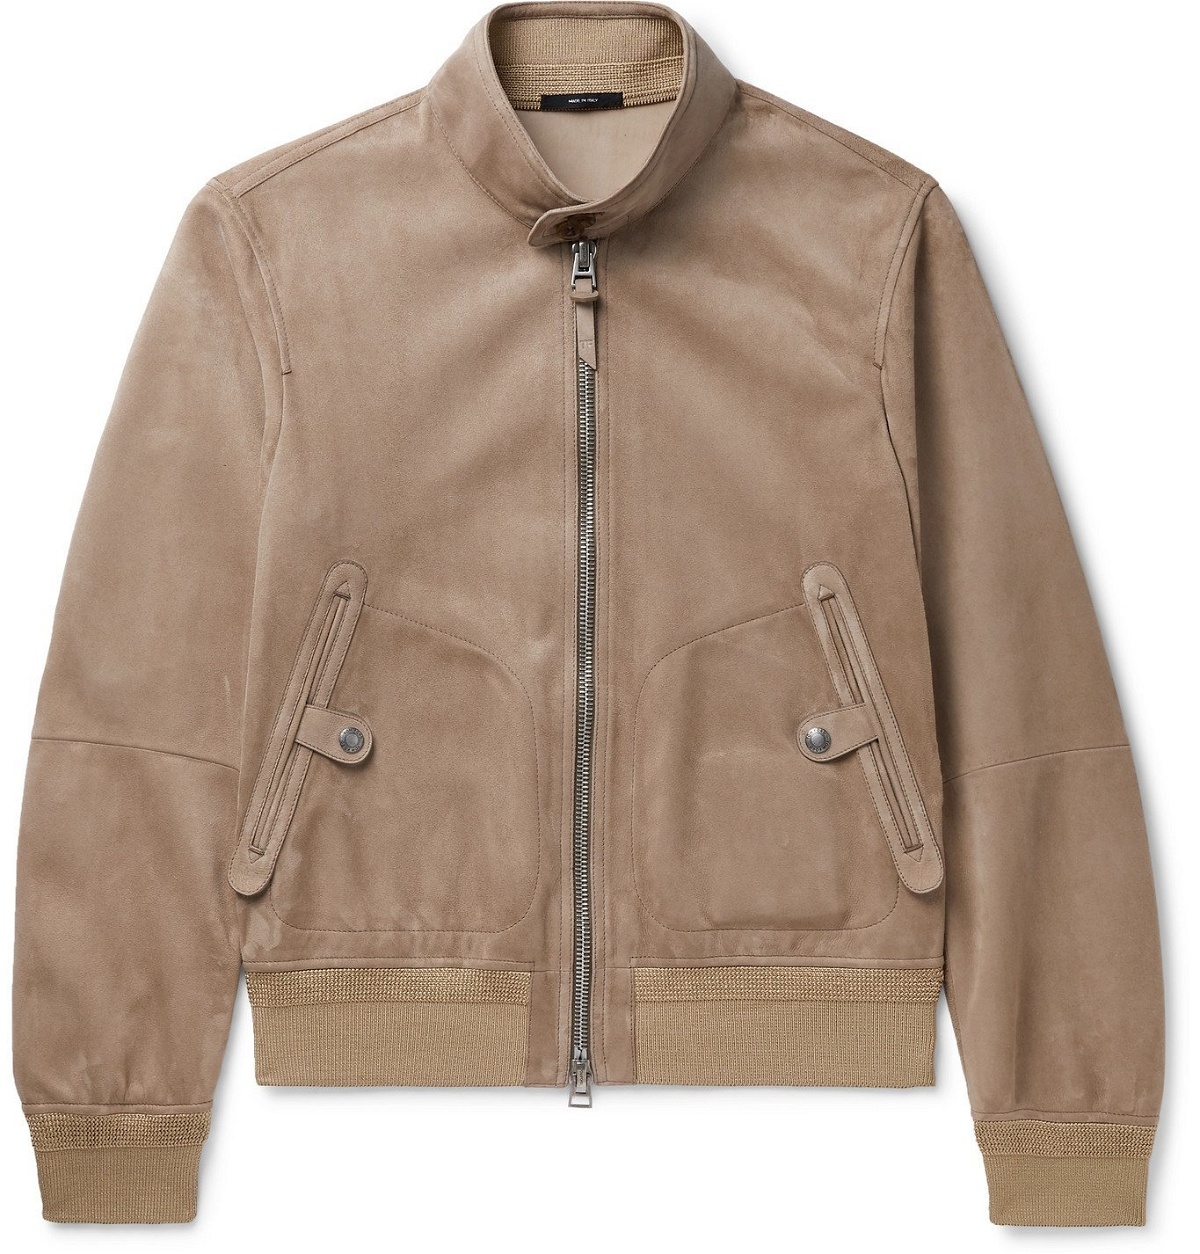 TOM FORD - Suede Bomber Jacket - Unknown TOM FORD